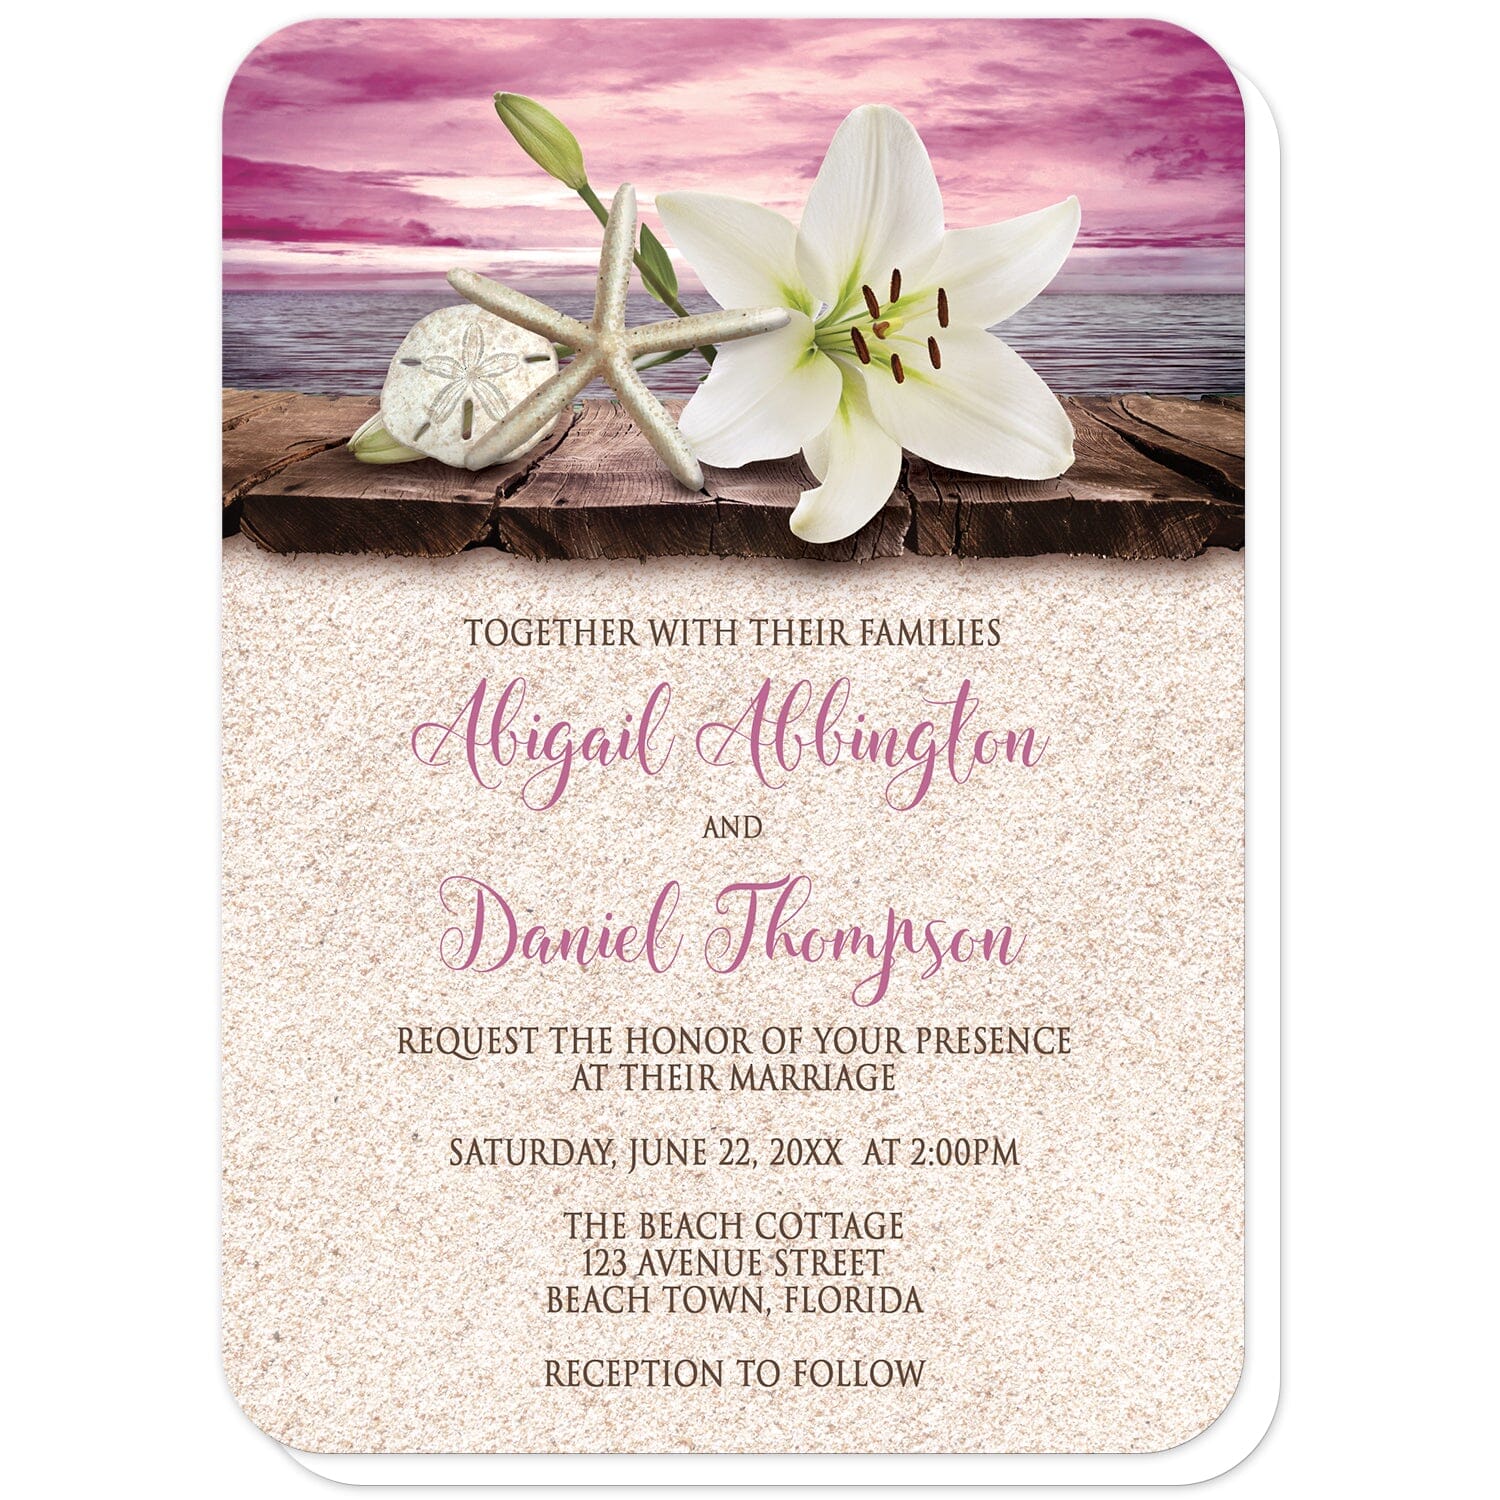 Lily Seashells and Sand Magenta Beach Wedding Invitations (with rounded corners) at Artistically Invited. Tropical lily seashells and sand magenta beach wedding invitations with an elegant white lily, a starfish, and a sand dollar on a rustic wood dock overlooking the open water under a magenta sunset sky. Your personalized marriage celebration details are custom printed in dark brown and magenta over a beige sand background design.